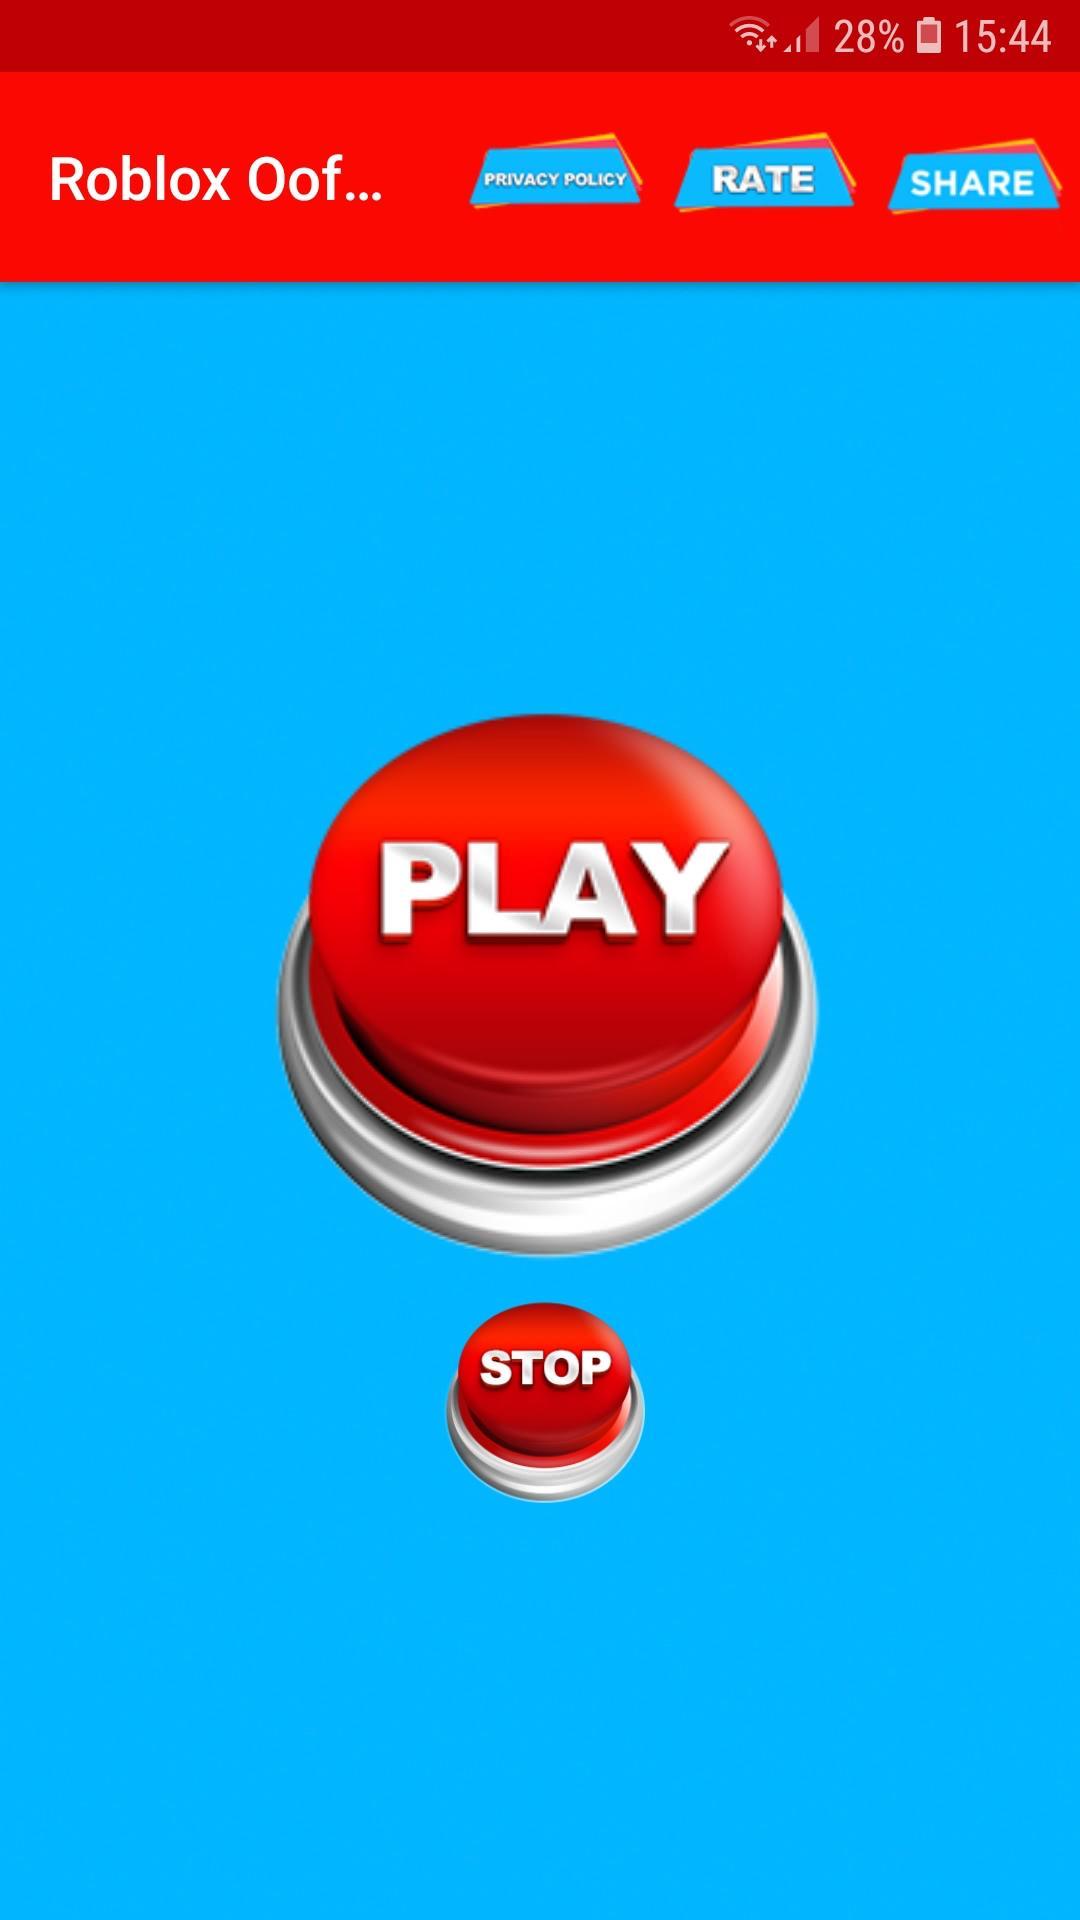 Oof Roblox Button Death Sound For Android Apk Download - death sound button for roblox for android free download and